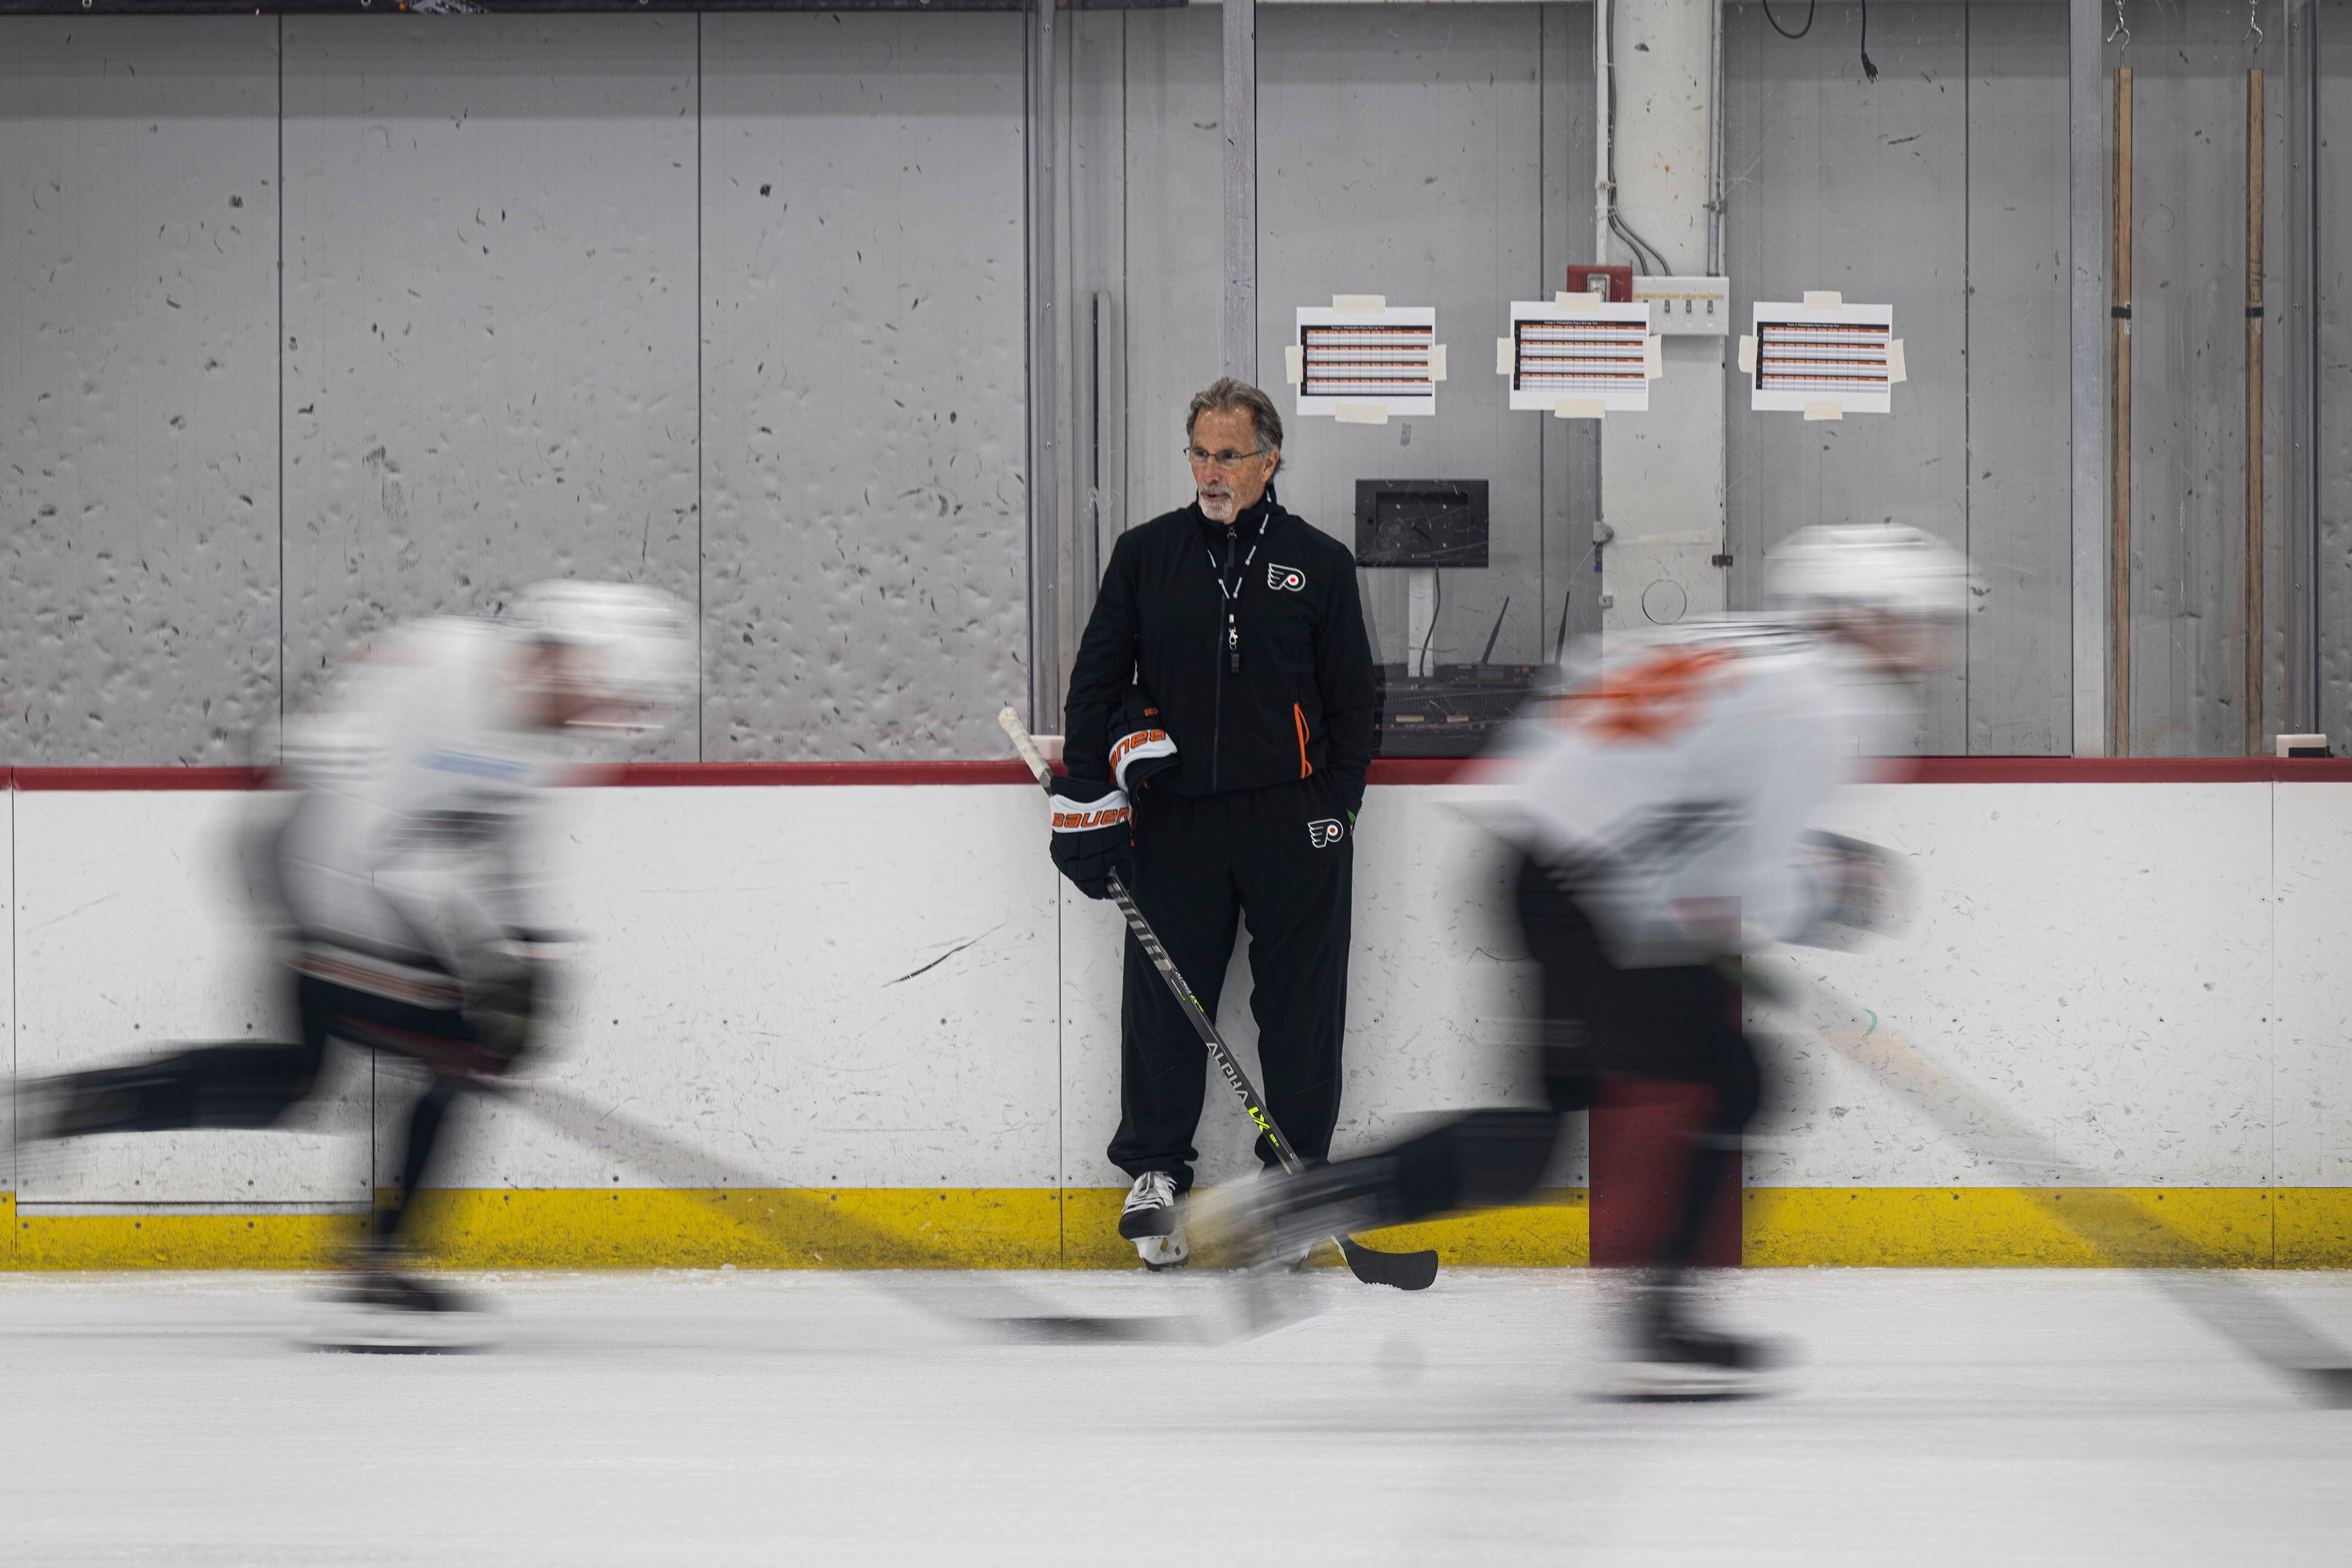 john tortorella has a young flyers team rolling. how? by changing his ways.